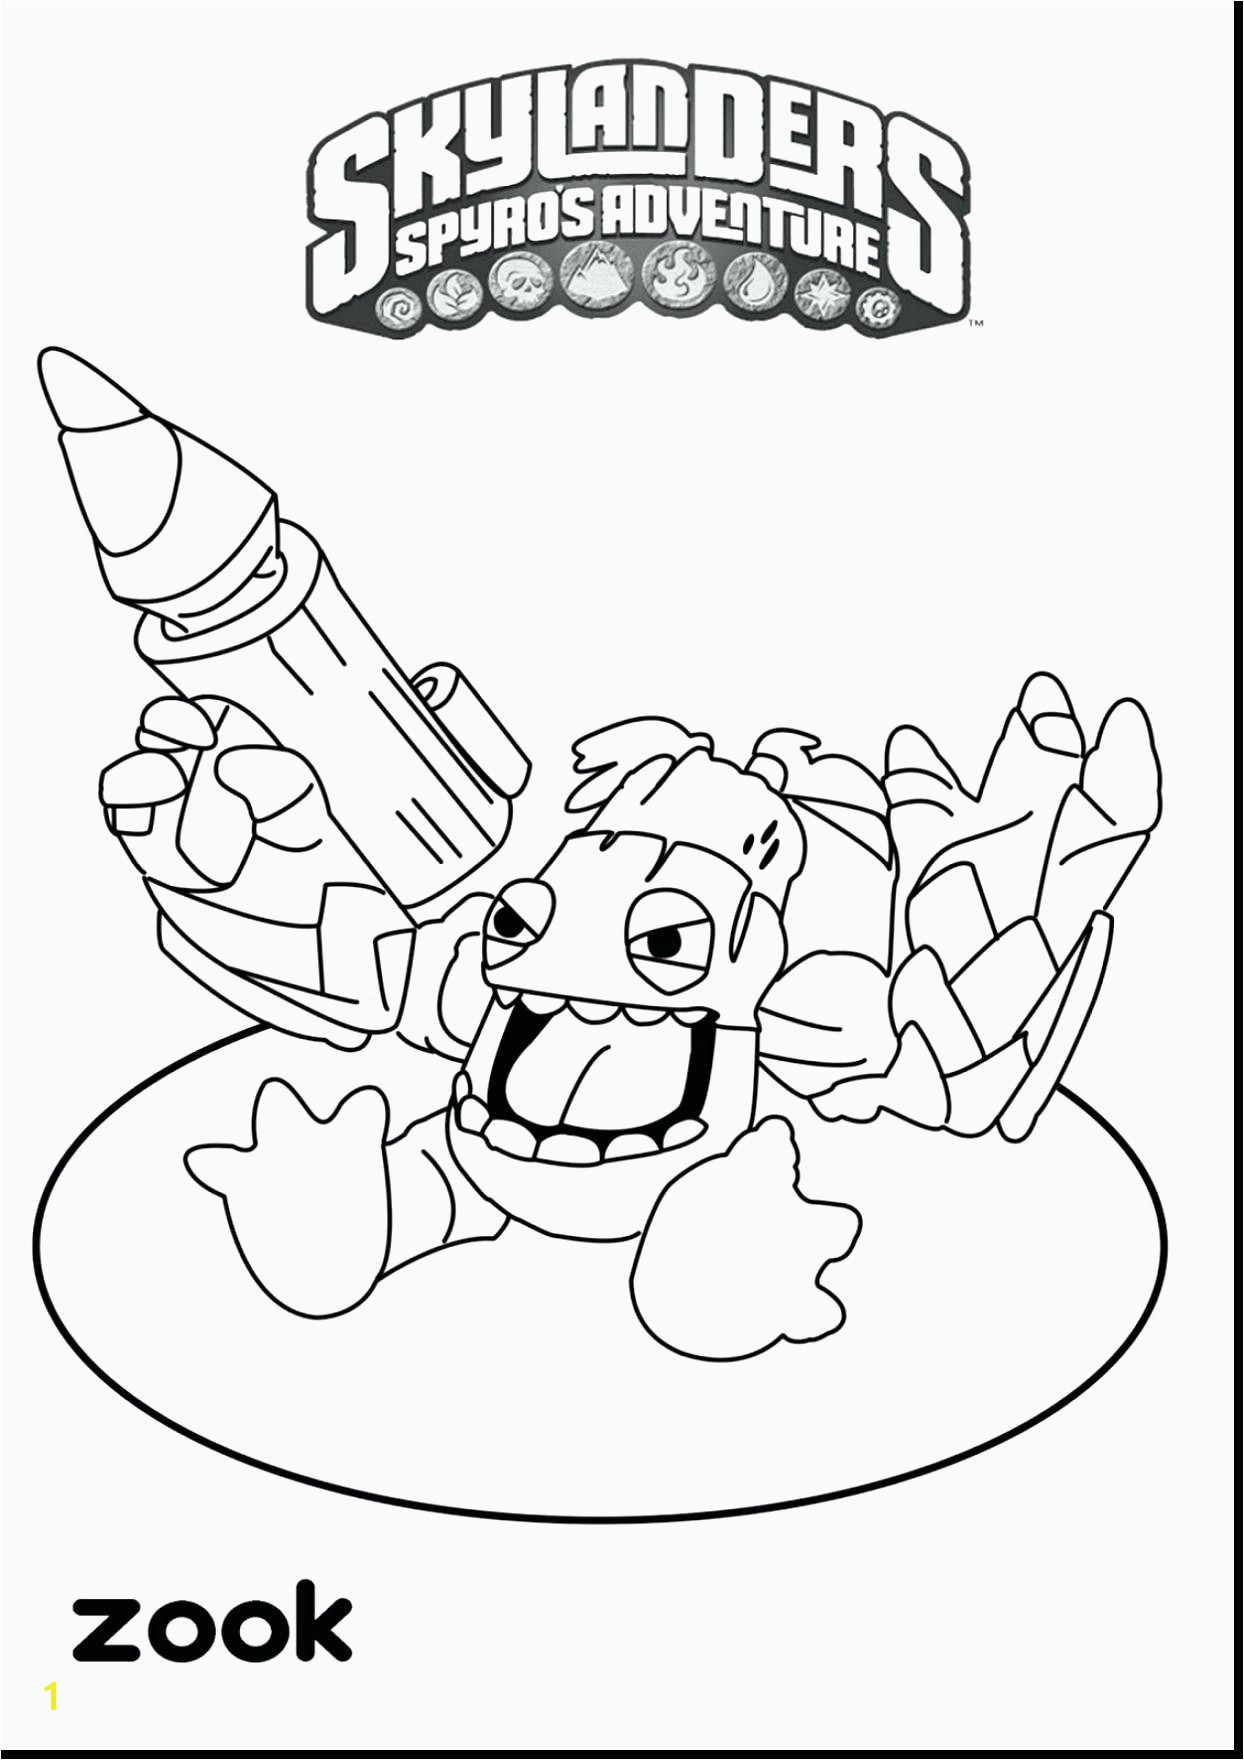 Ben 10 Coloring Pages Upgrade Beautiful Printing Coloring Book Heathermarxgallery Ben 10 Coloring Pages Upgrade